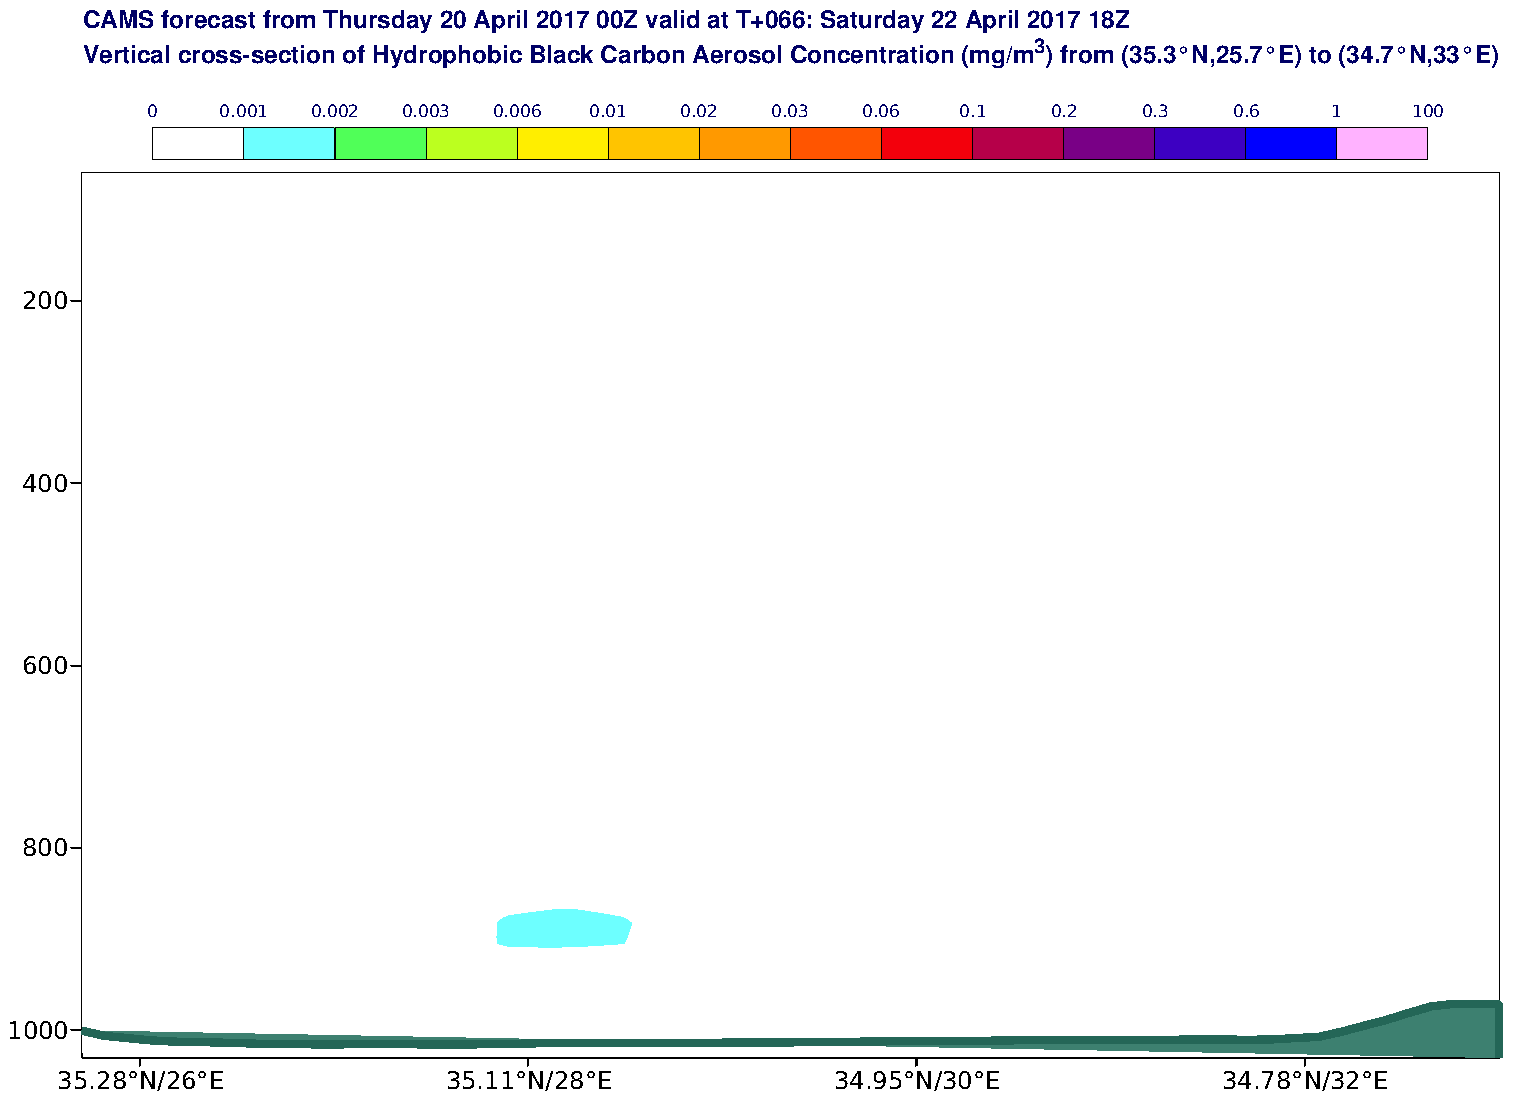 Vertical cross-section of Hydrophobic Black Carbon Aerosol Concentration (mg/m3) valid at T66 - 2017-04-22 18:00